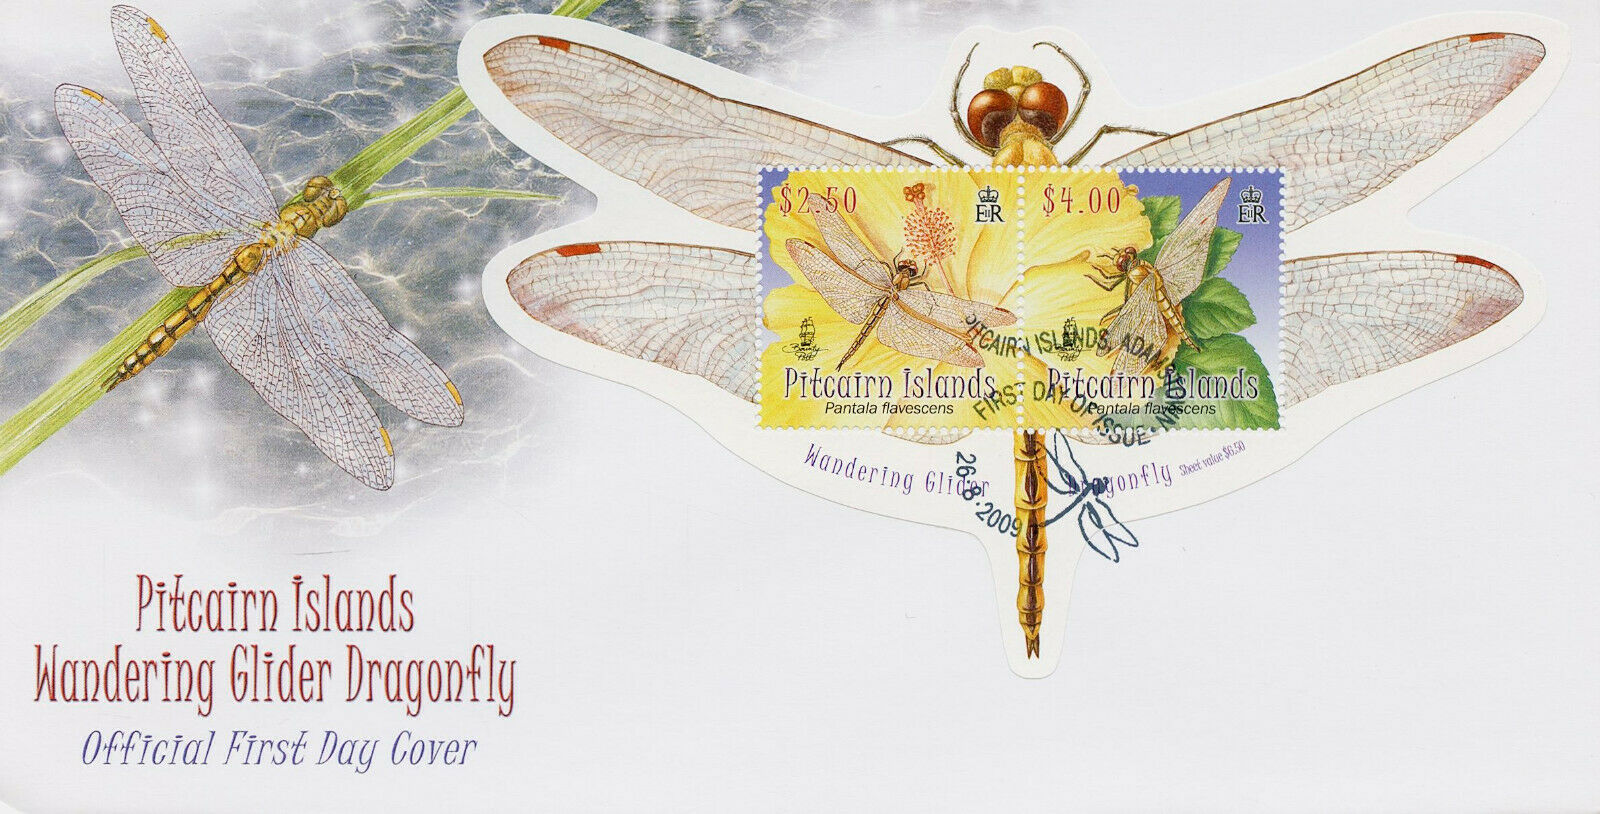 Pitcairn Islands 2009 FDC Insects Stamps Wandering Glider Dragonfly 2v M/S